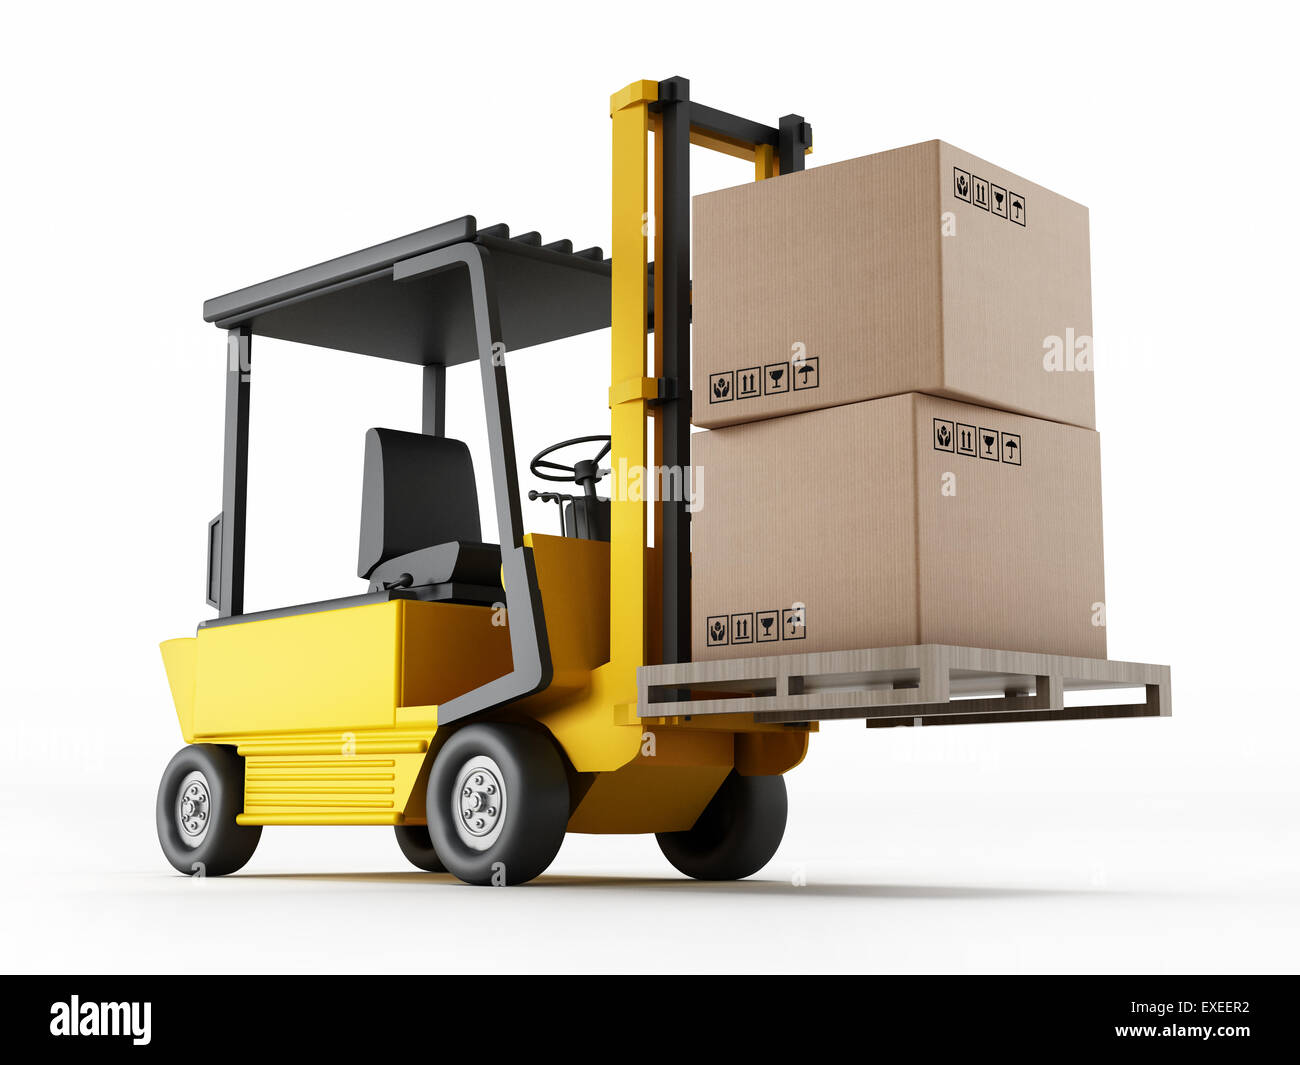 Transportation and shipping concept with a forklift holding cargo boxes Stock Photo